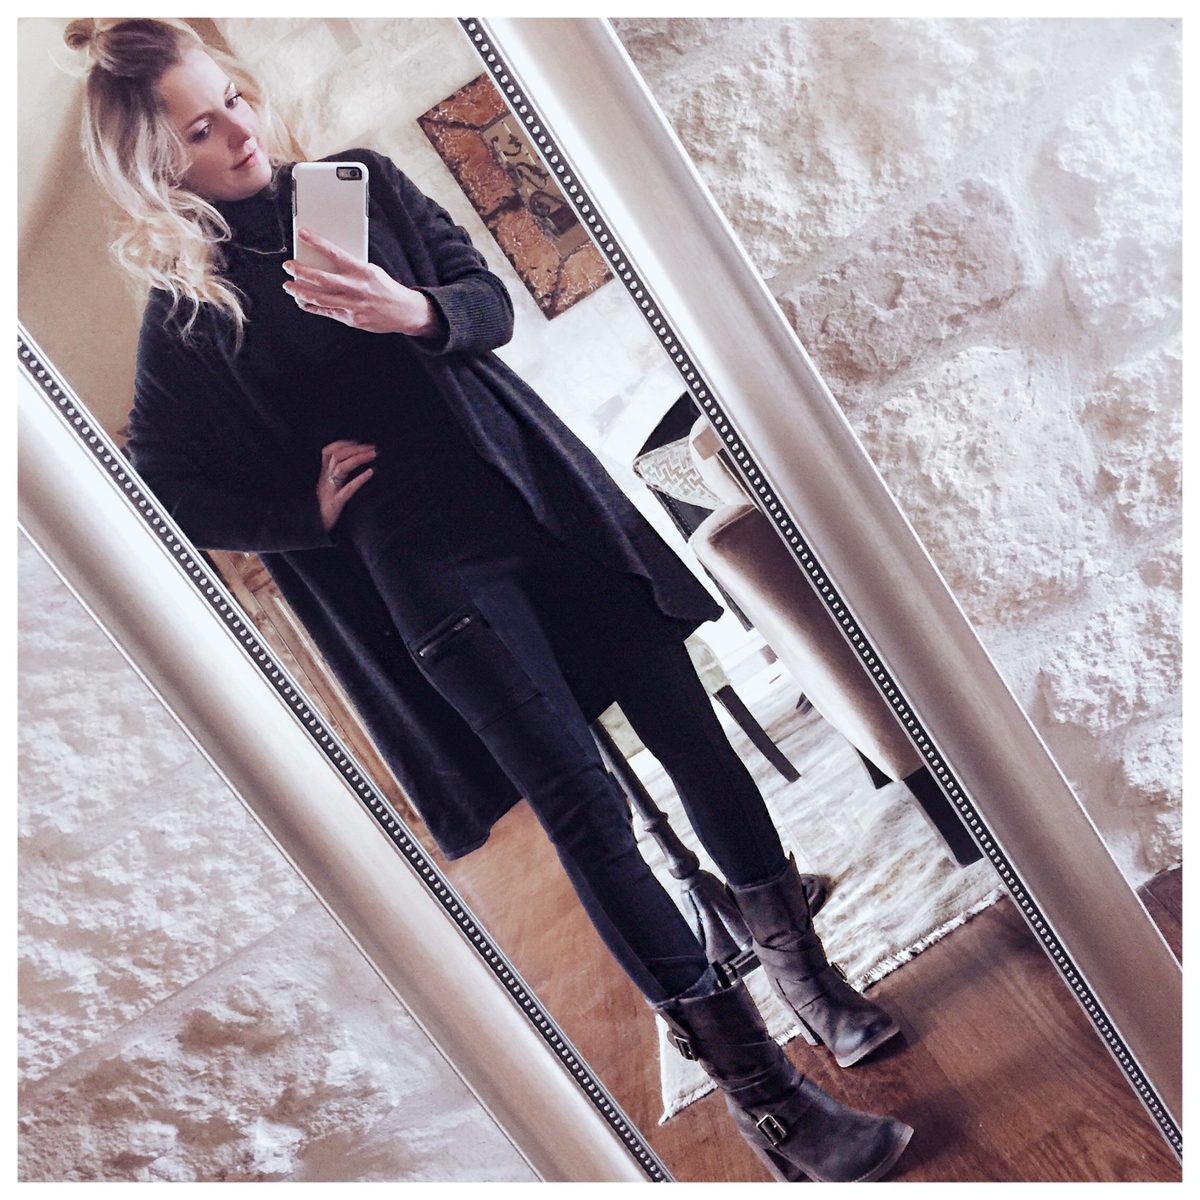 Black basics work well for my weekend trip to the ranch. I paired black cargo leggings by spanx that look more like jeans, with a black turtleneck from nordstrom and a cocoon cardigan by Leith with moto buckle boots by Jeffrey Campbell